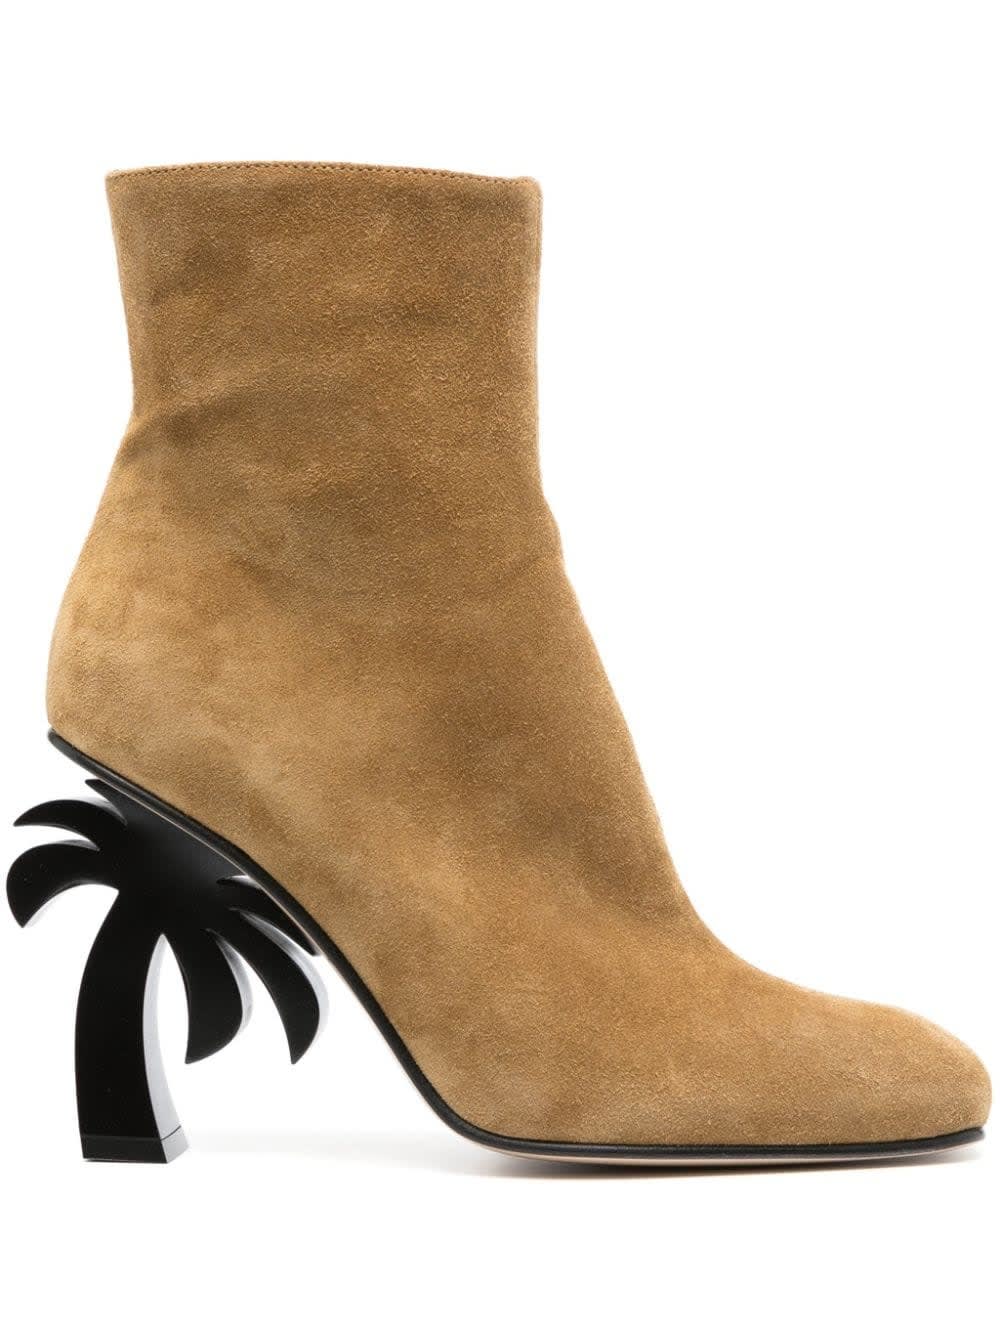 Beige Suede Ankle Boots With Palm Heel